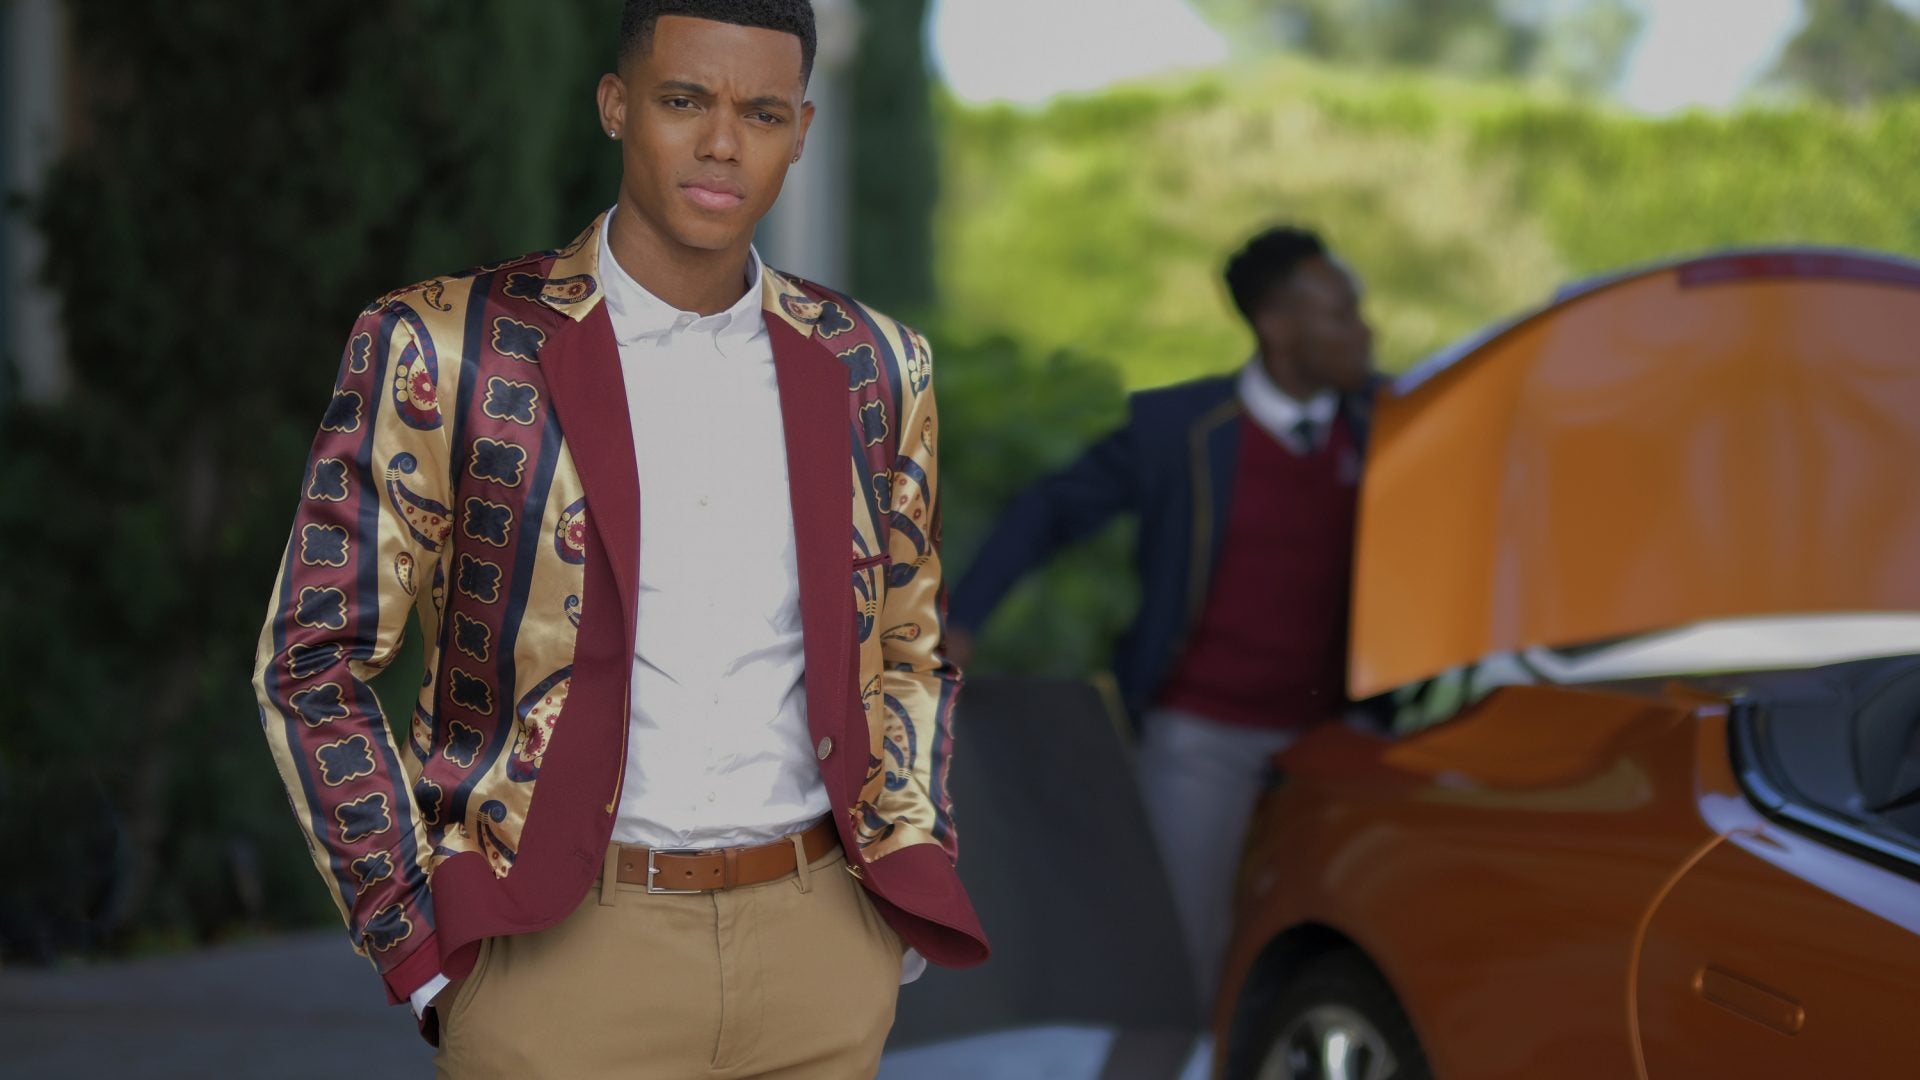 WATCH: Jabari Banks Discusses Why 'Bel-Air' Season 2's Twists Are Bound To Shock Fans